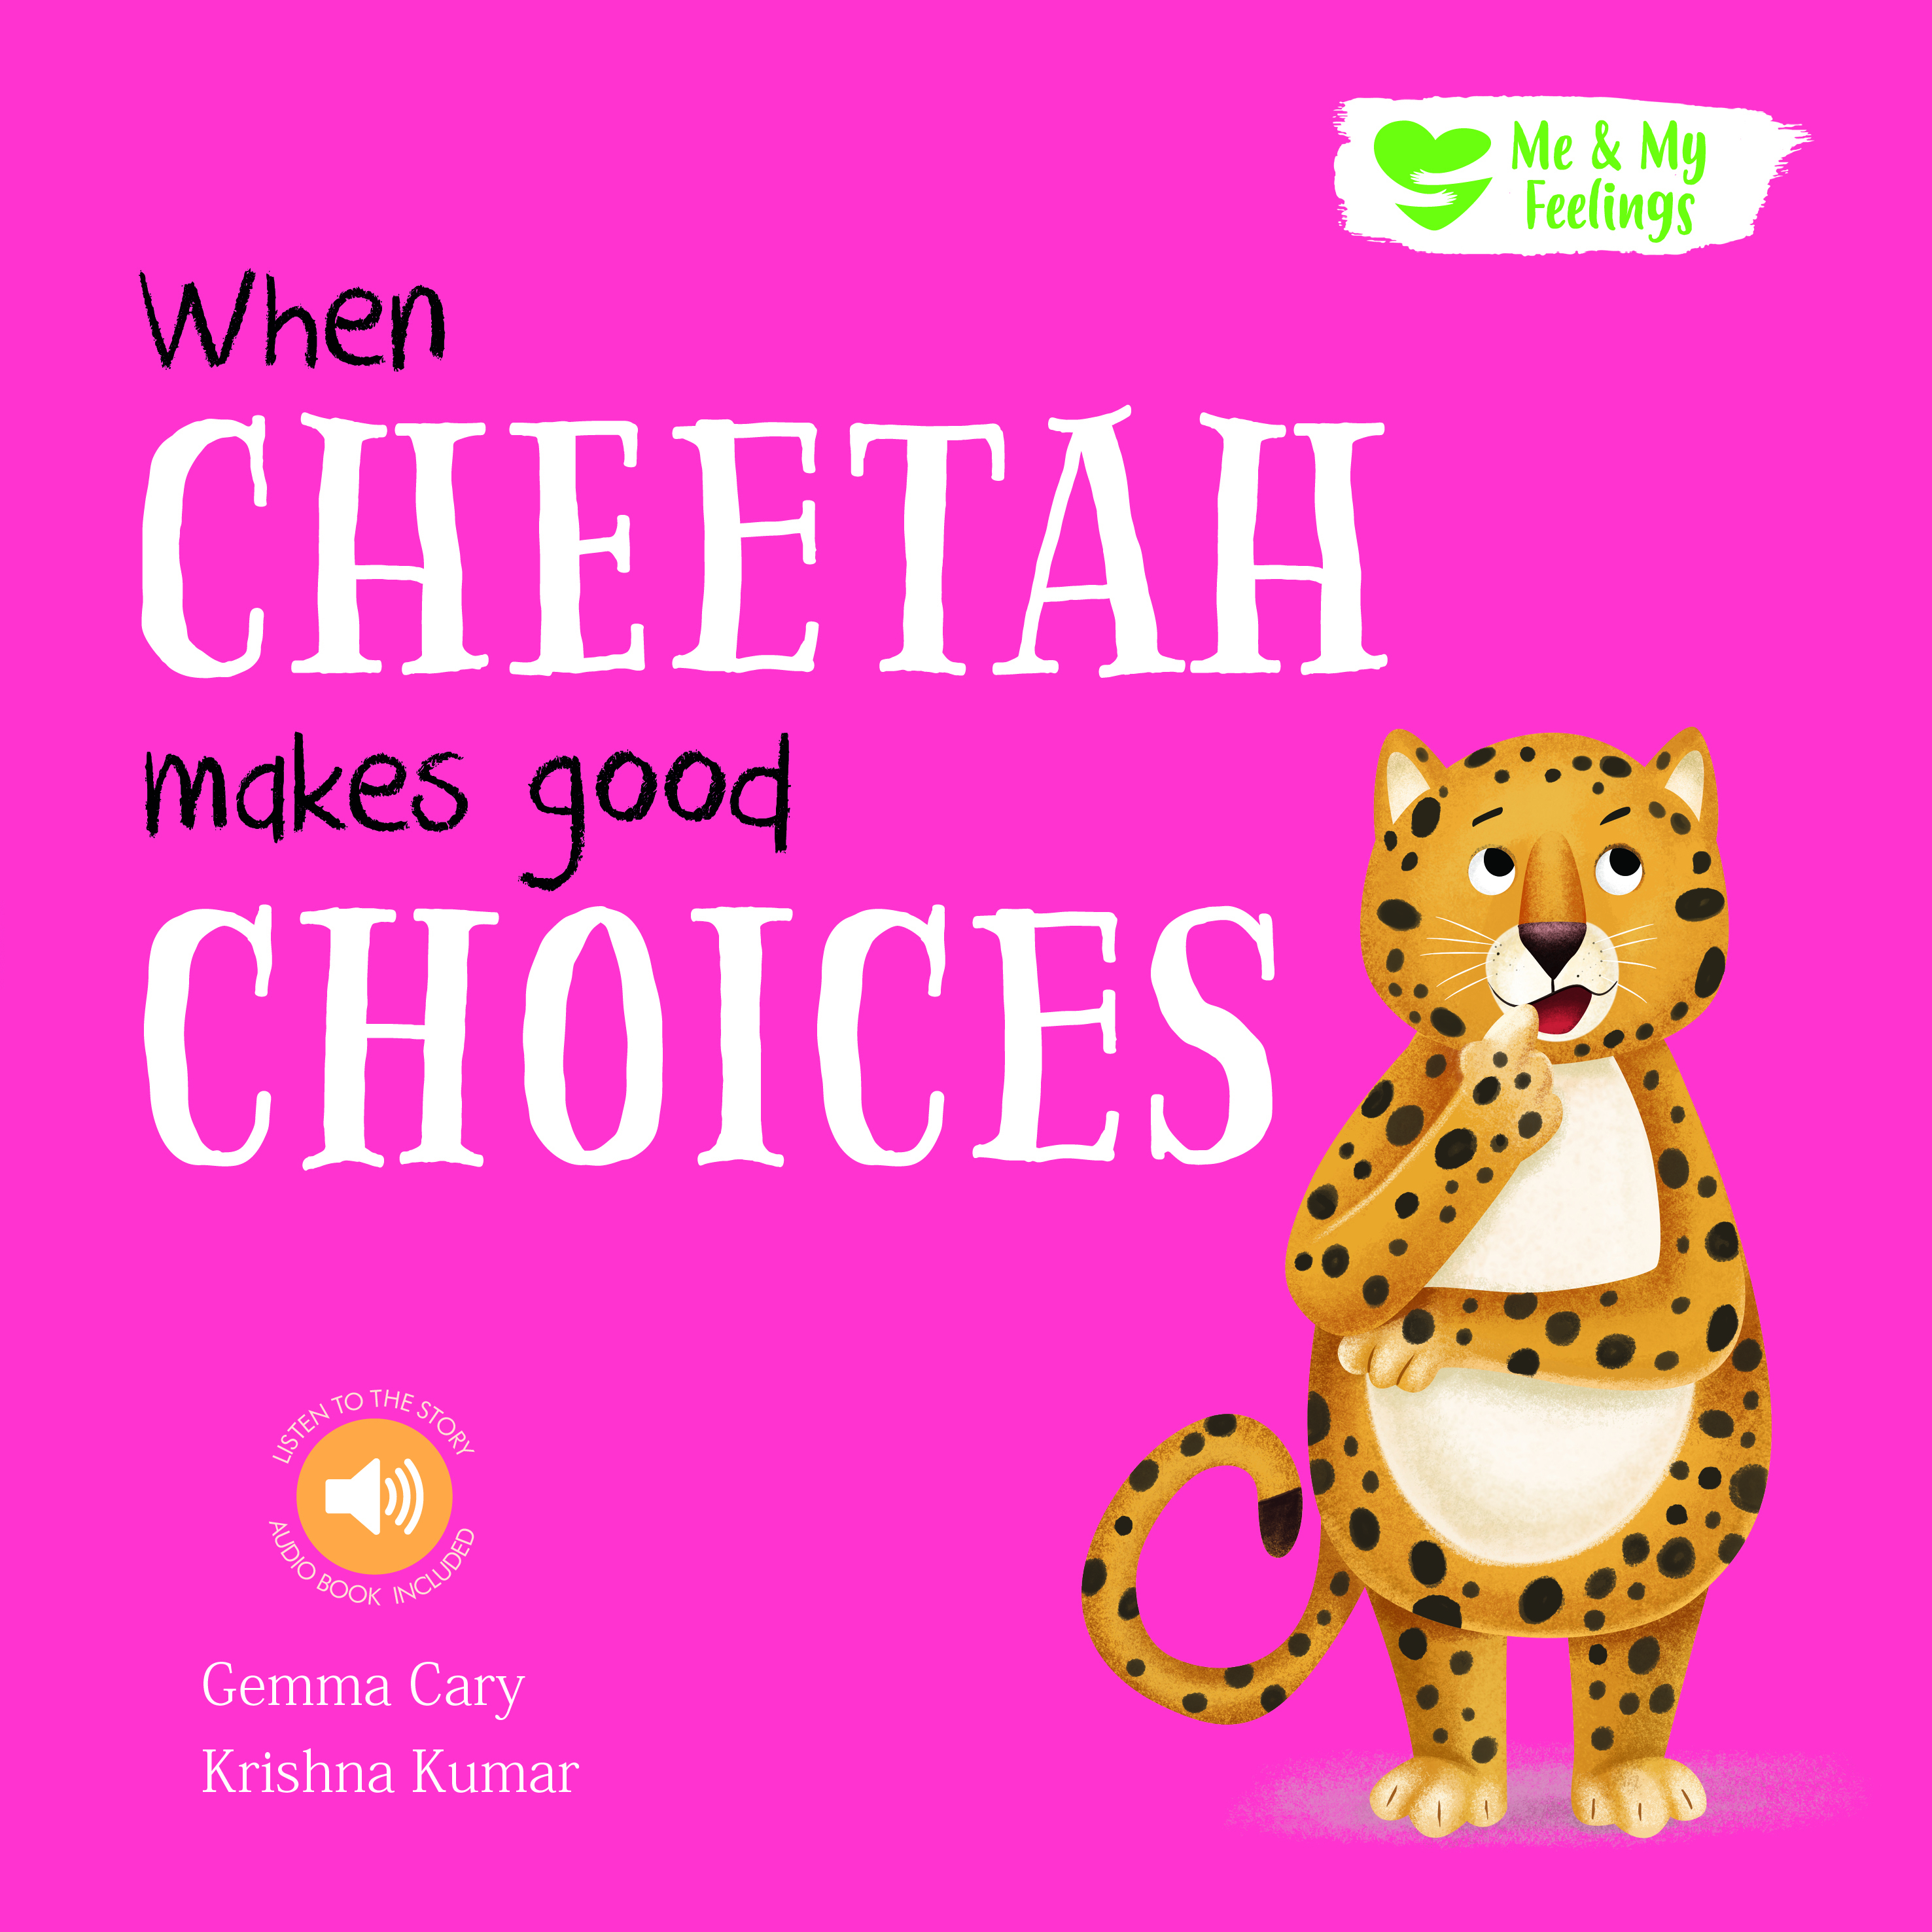 Me And My Feelings - When Cheetah Makes Good Choices